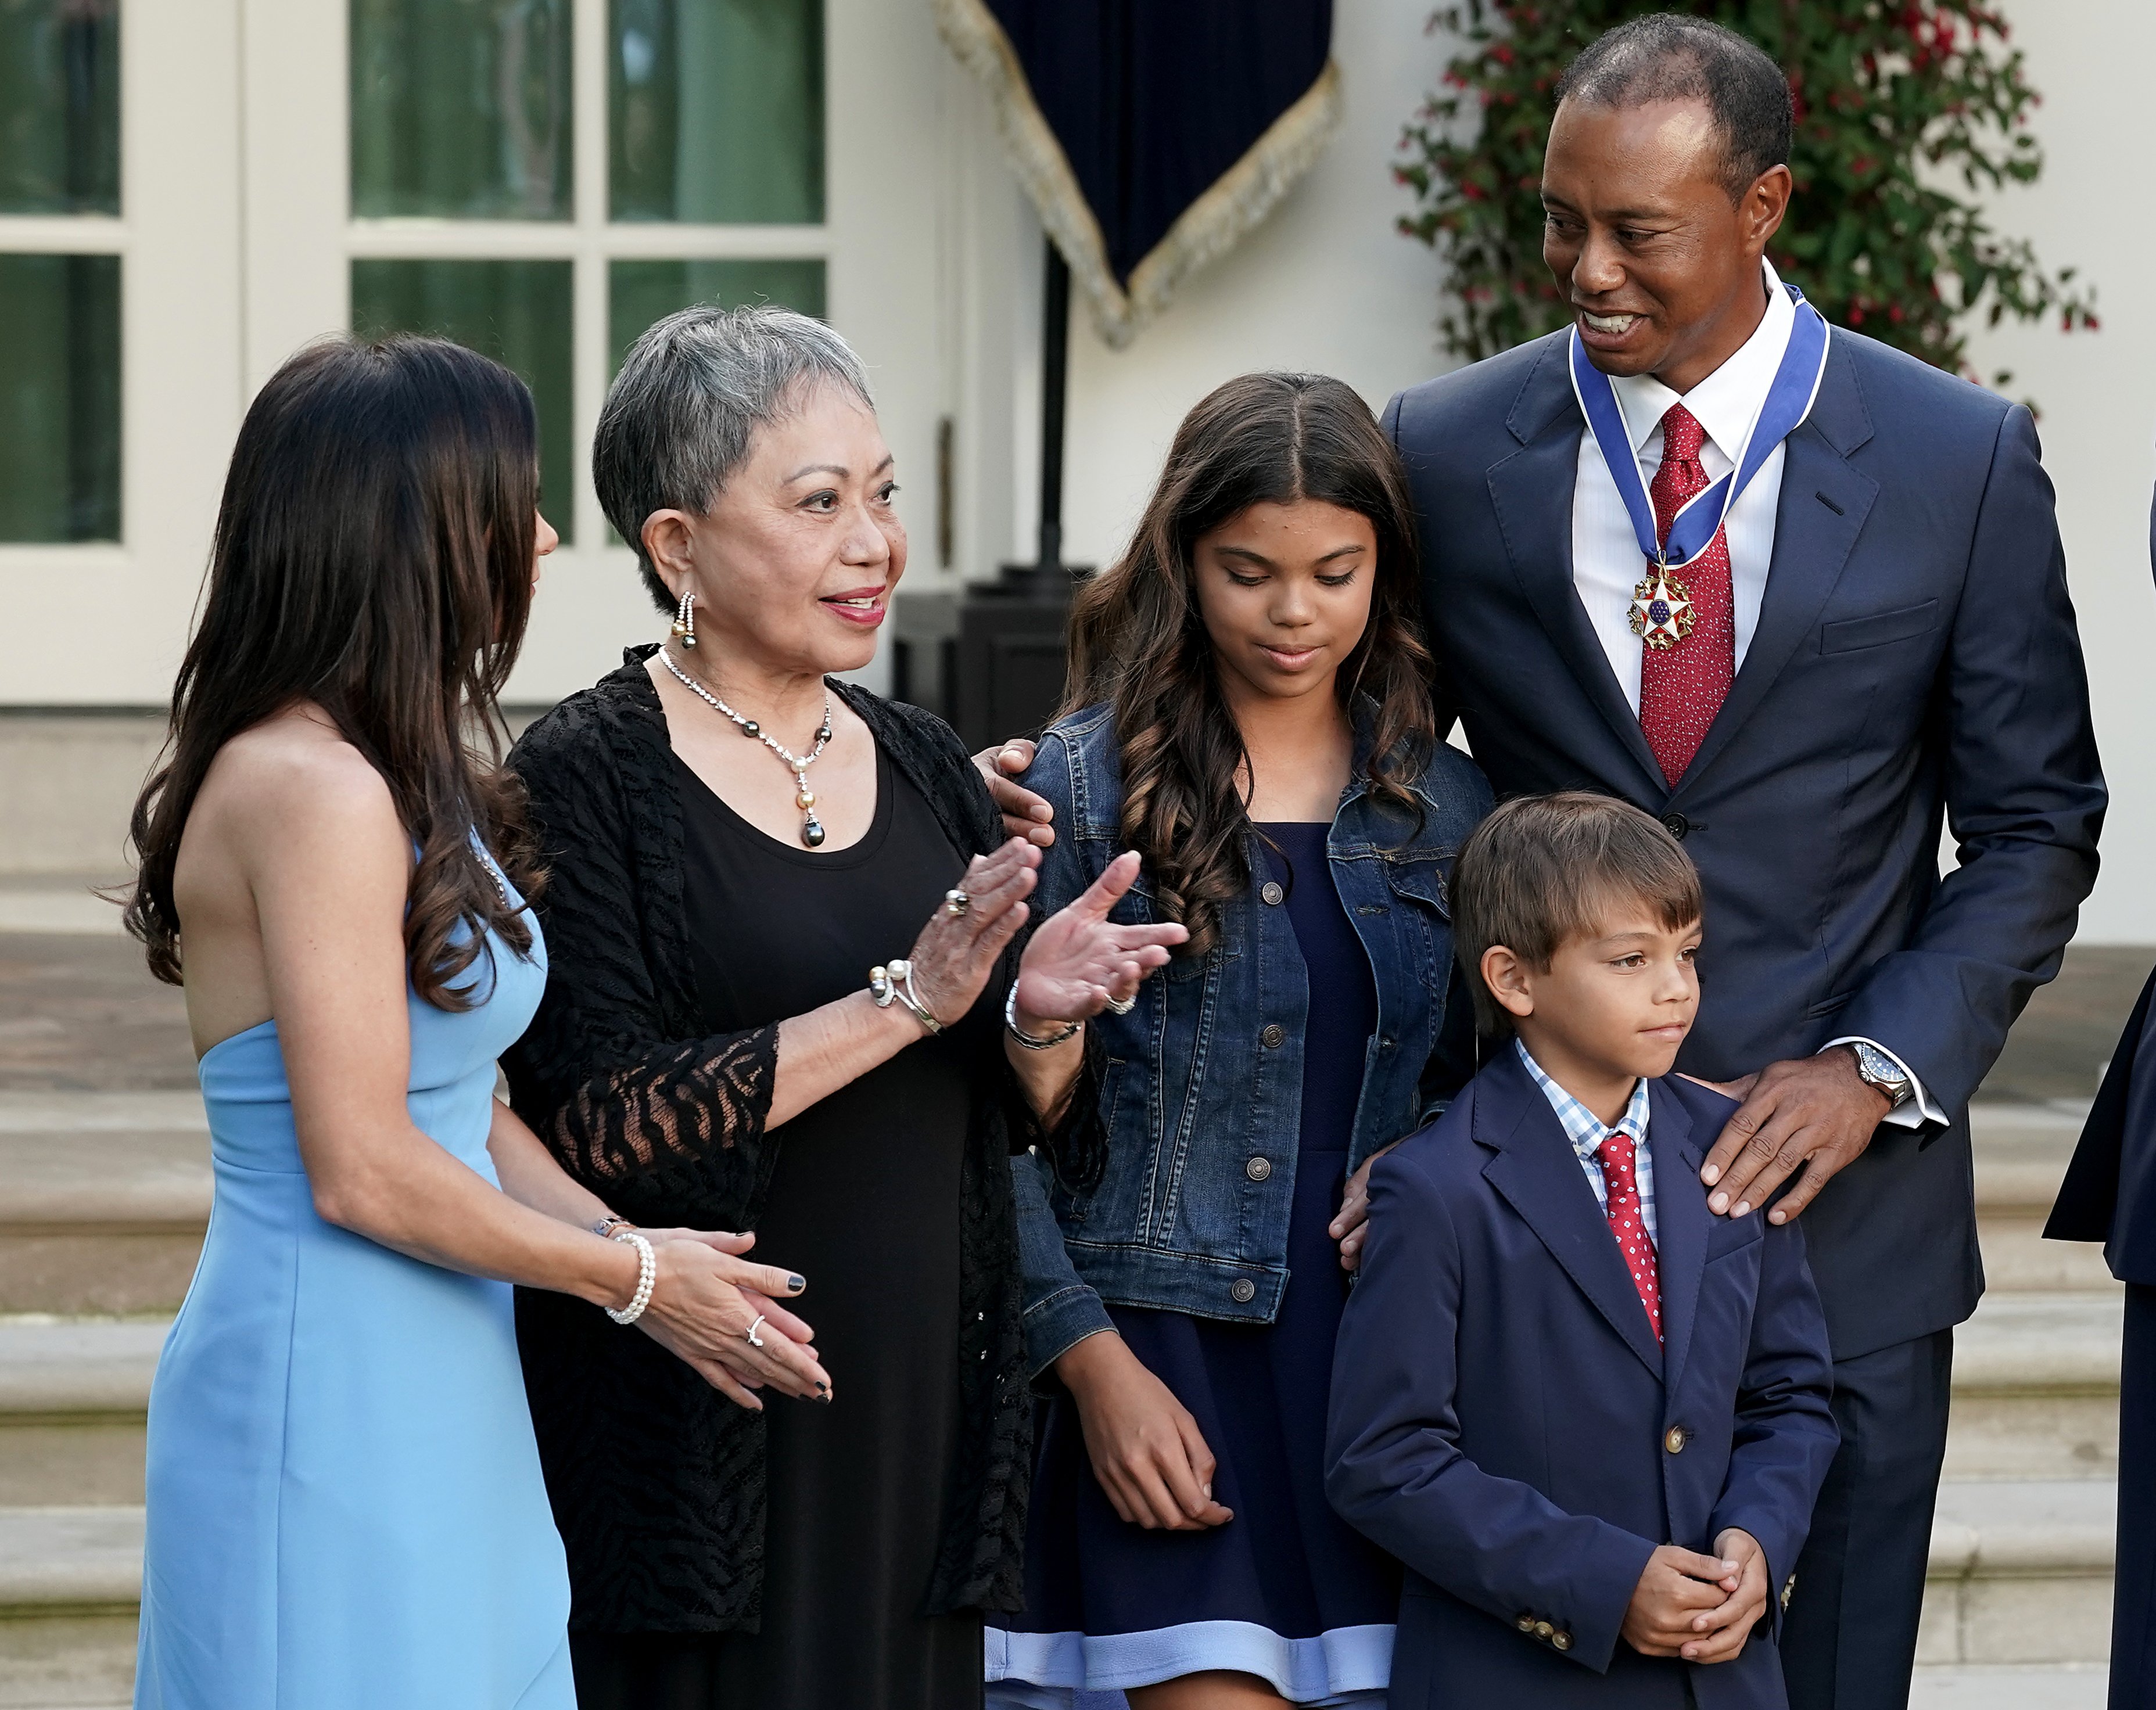 Professional golfer Tiger Woods (R) is joined by his mother Kultida Woods (2nd L), children Sam Alexis Woods and Charlie Axel Woods and girlfriend Erica Herman during his Medal of Freedom ceremony in the Rose Garden at the White House May 06, 2019 in Washington, DC. | Source: Getty Images